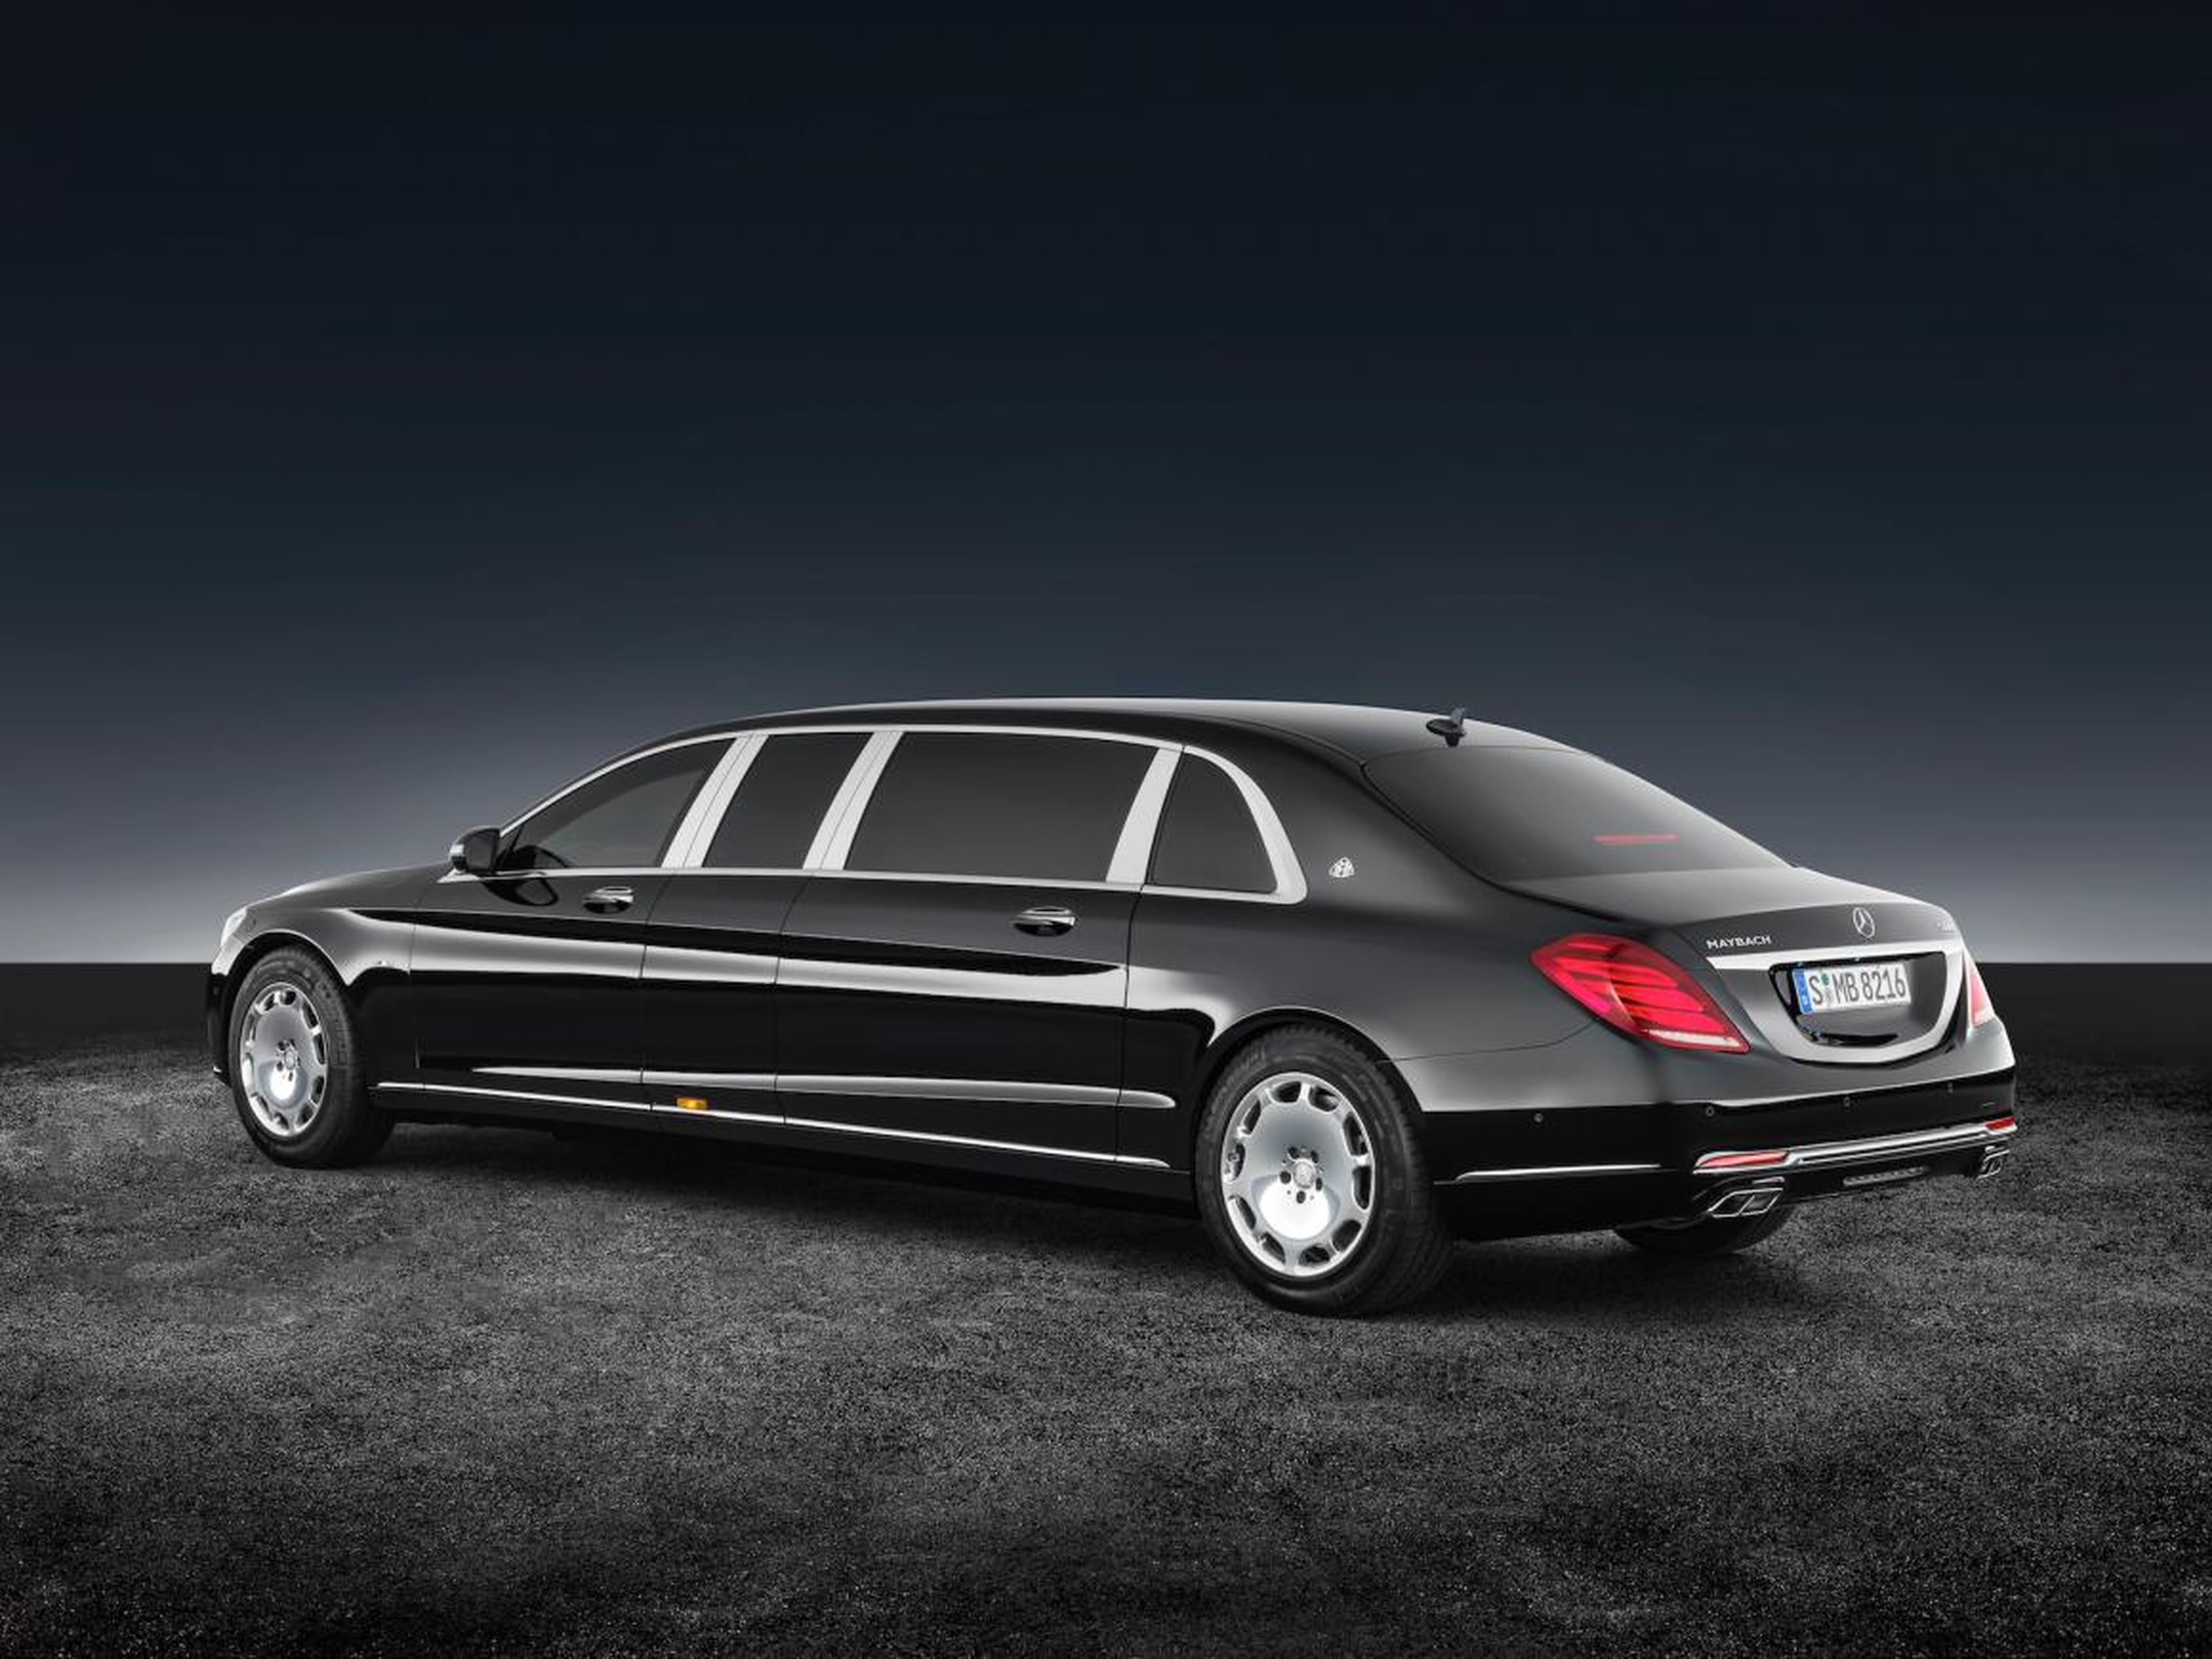 Power for the Pullman Guard comes from a monster 6.0-liter, 530-horsepower, twin-turbocharged V12 engine.